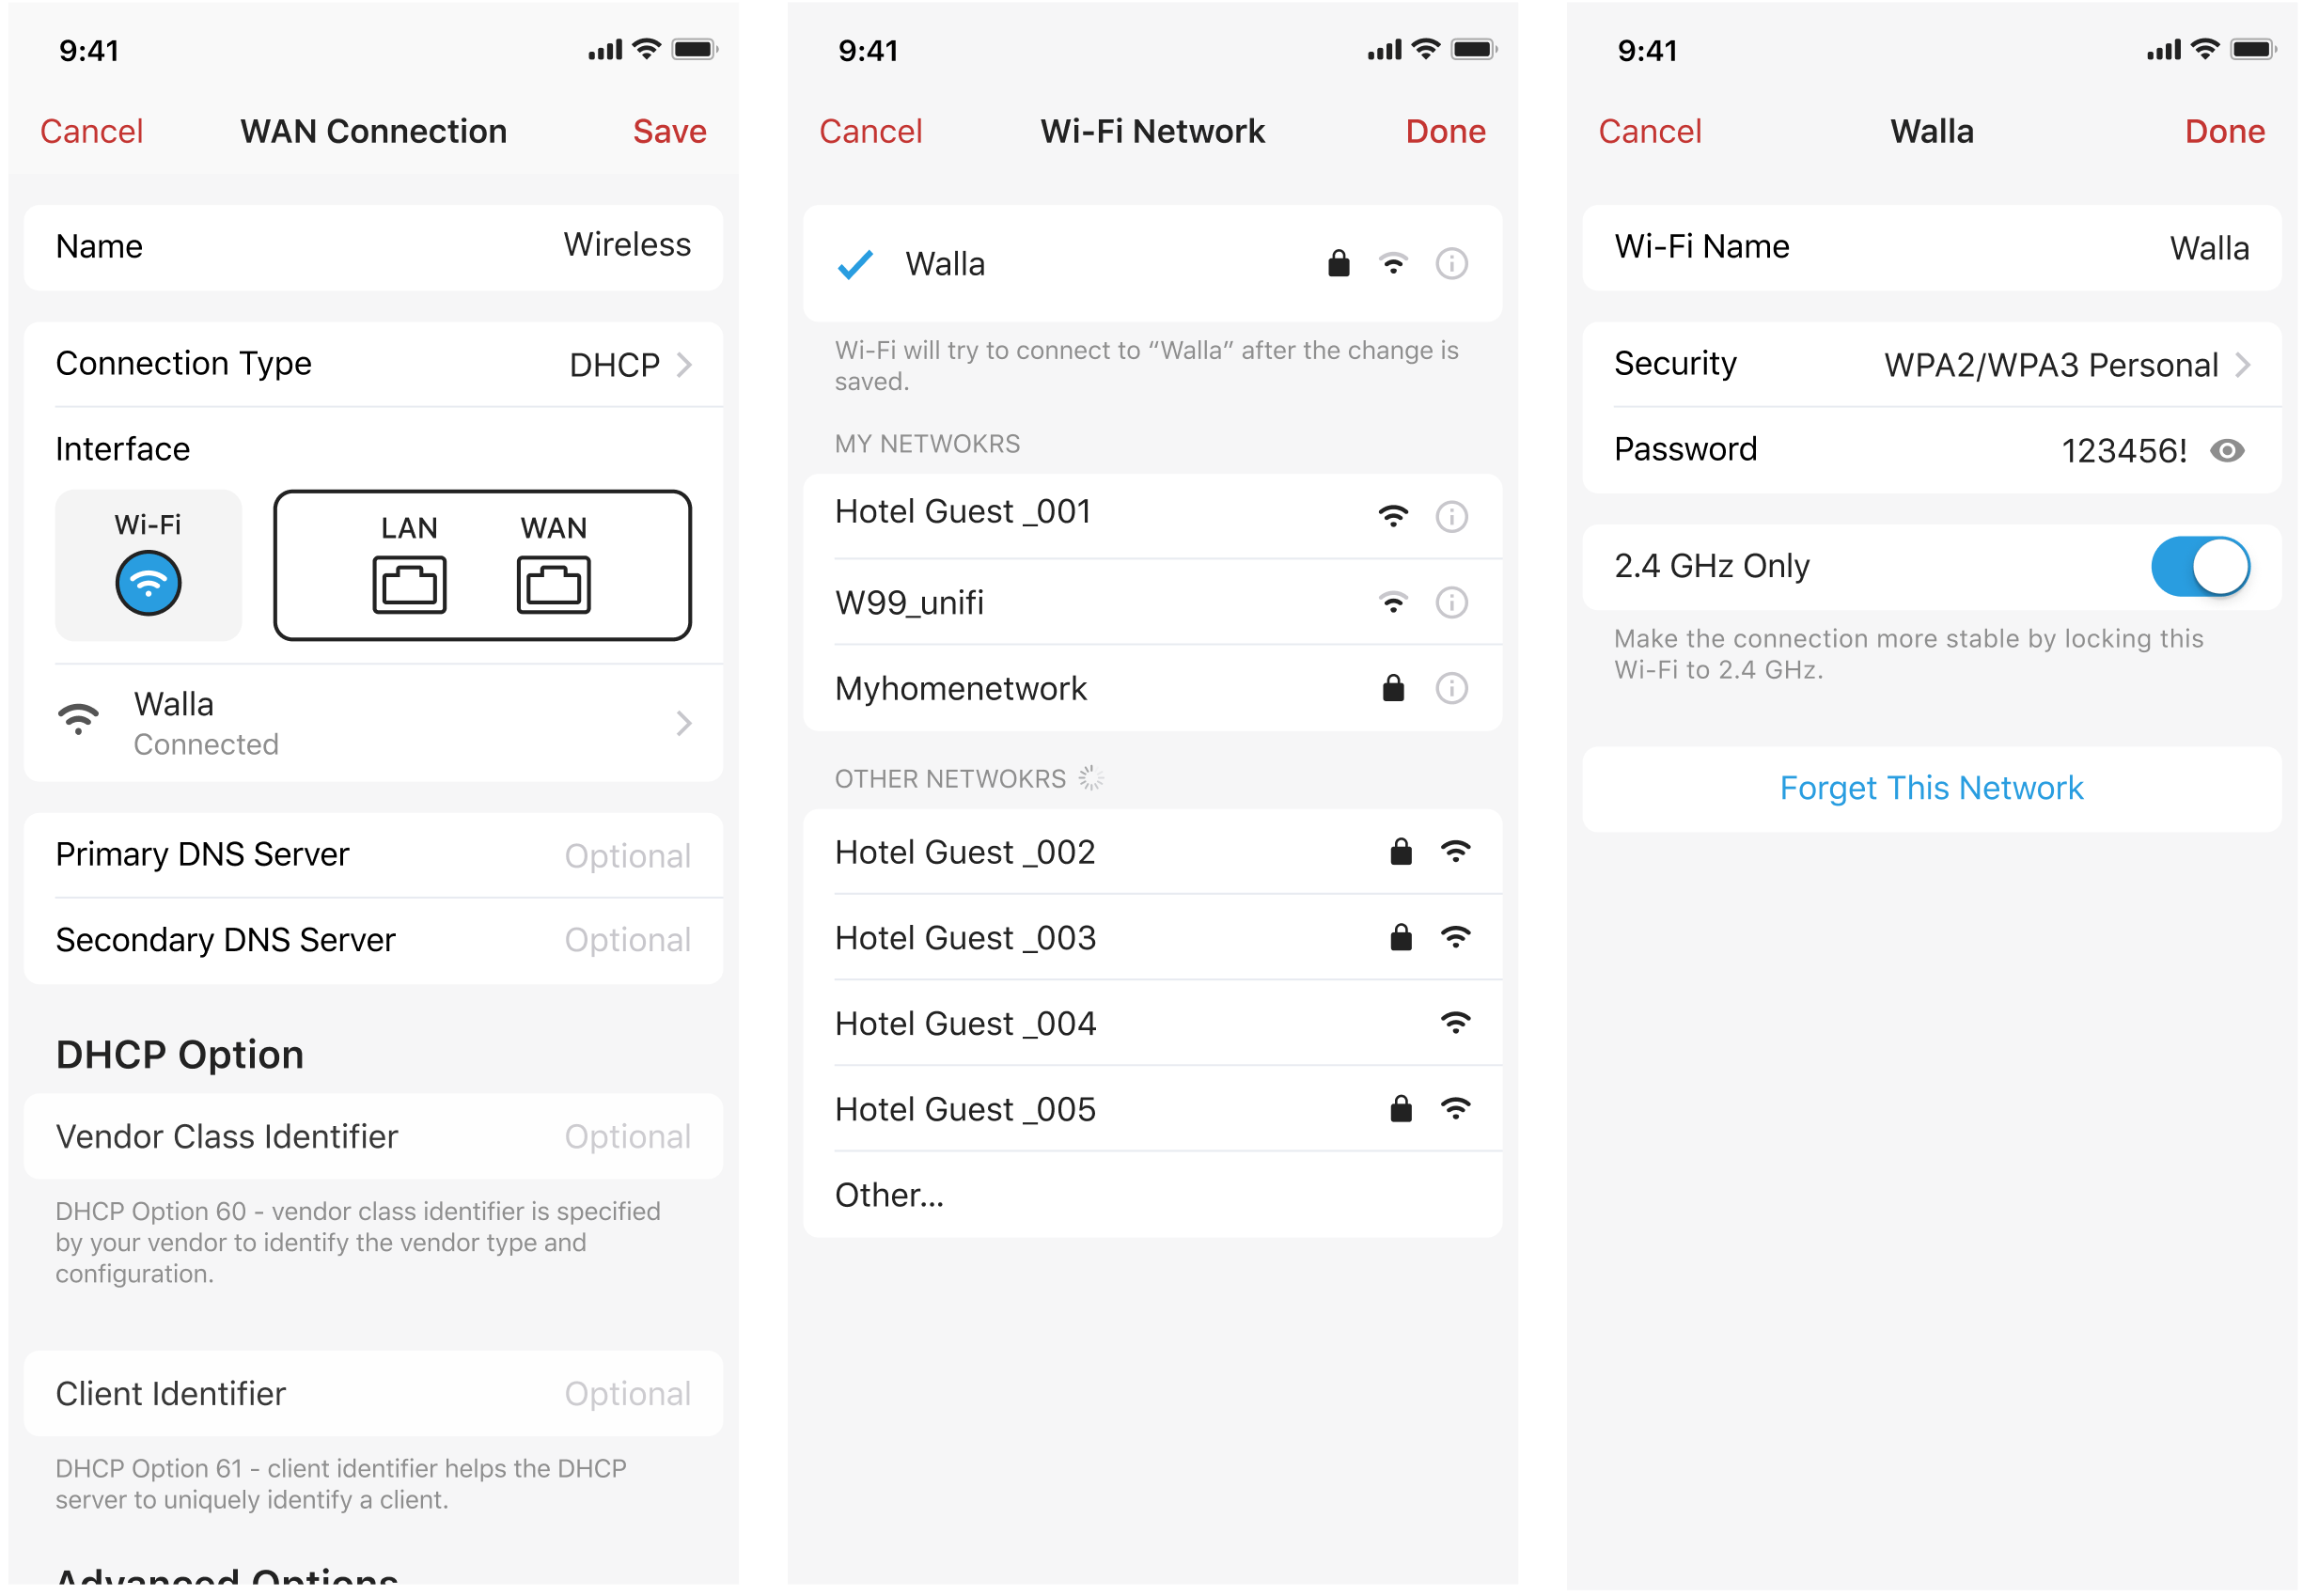 Create a New Network with WAN Connection via WiFi